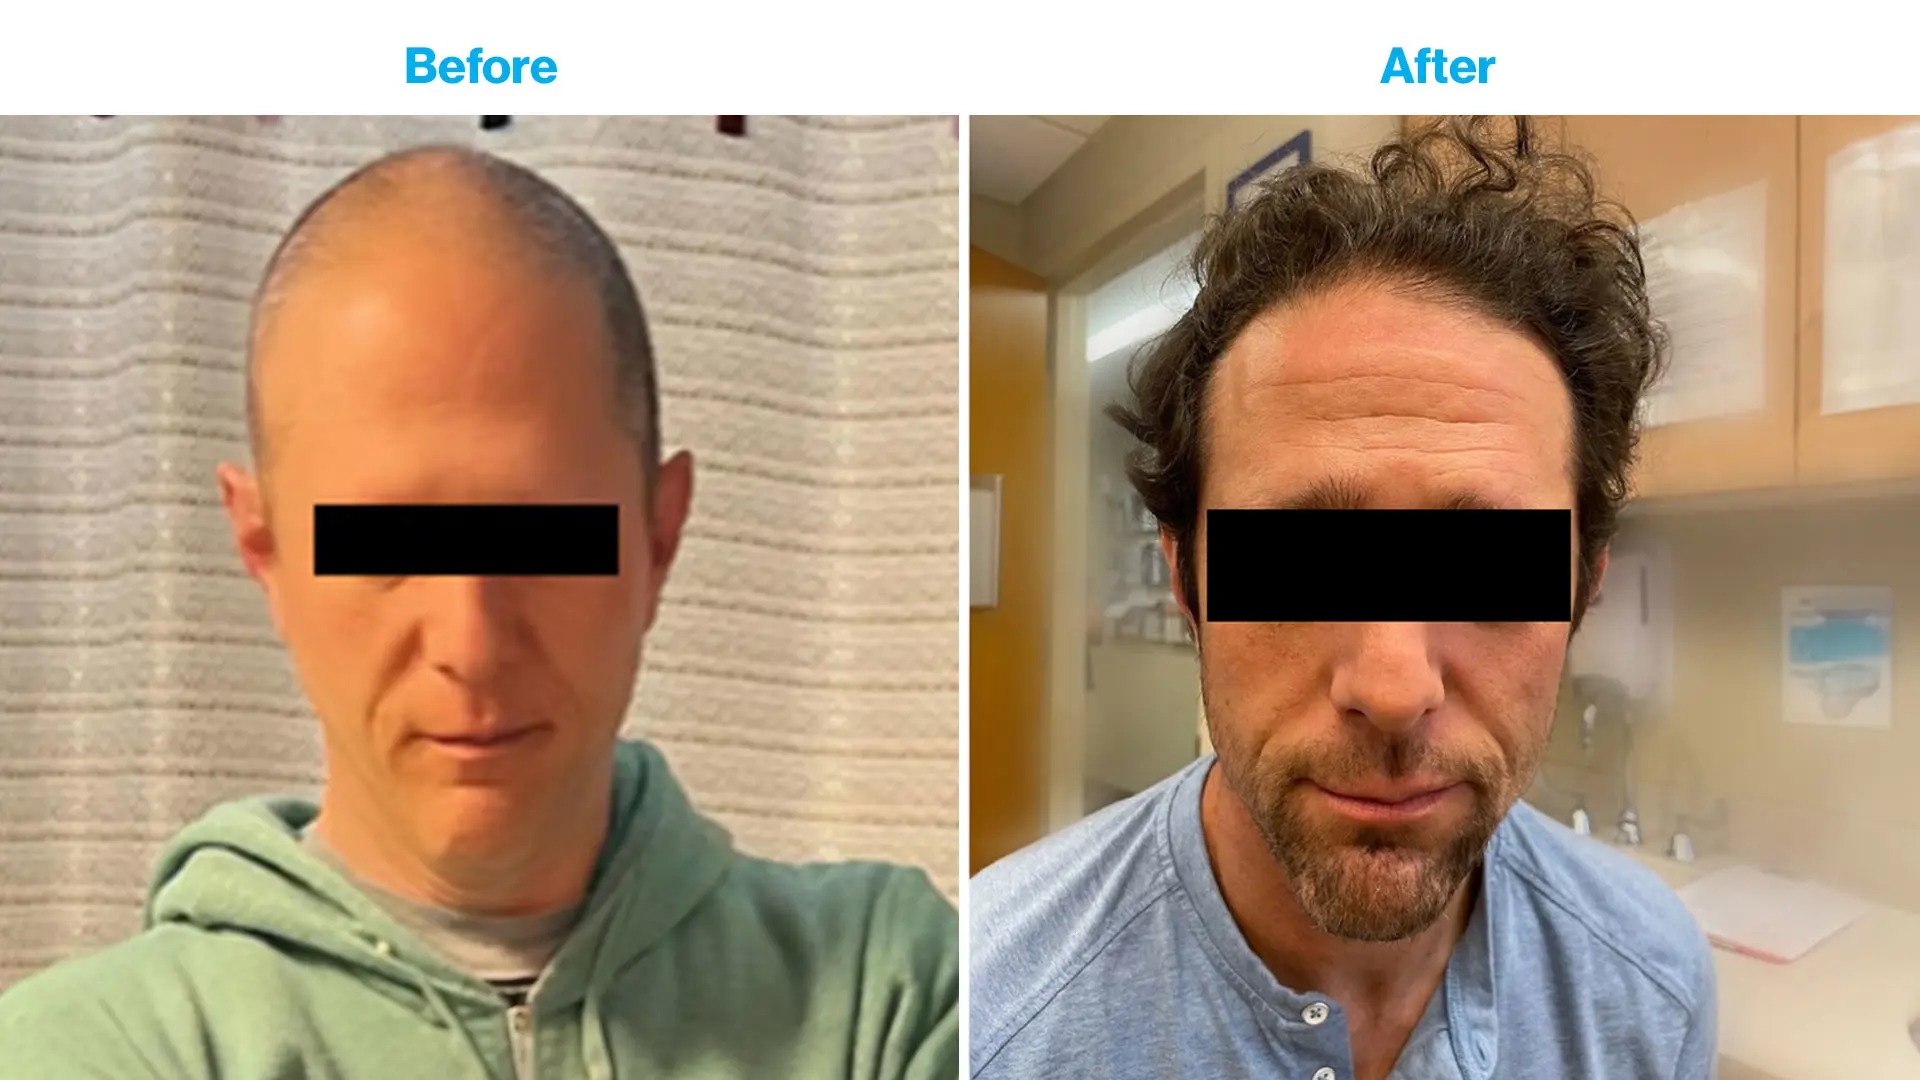 This patient had total hair loss five years ago, and is shown before and after treatment
provided by Emma Guttman, MD, PhD.
